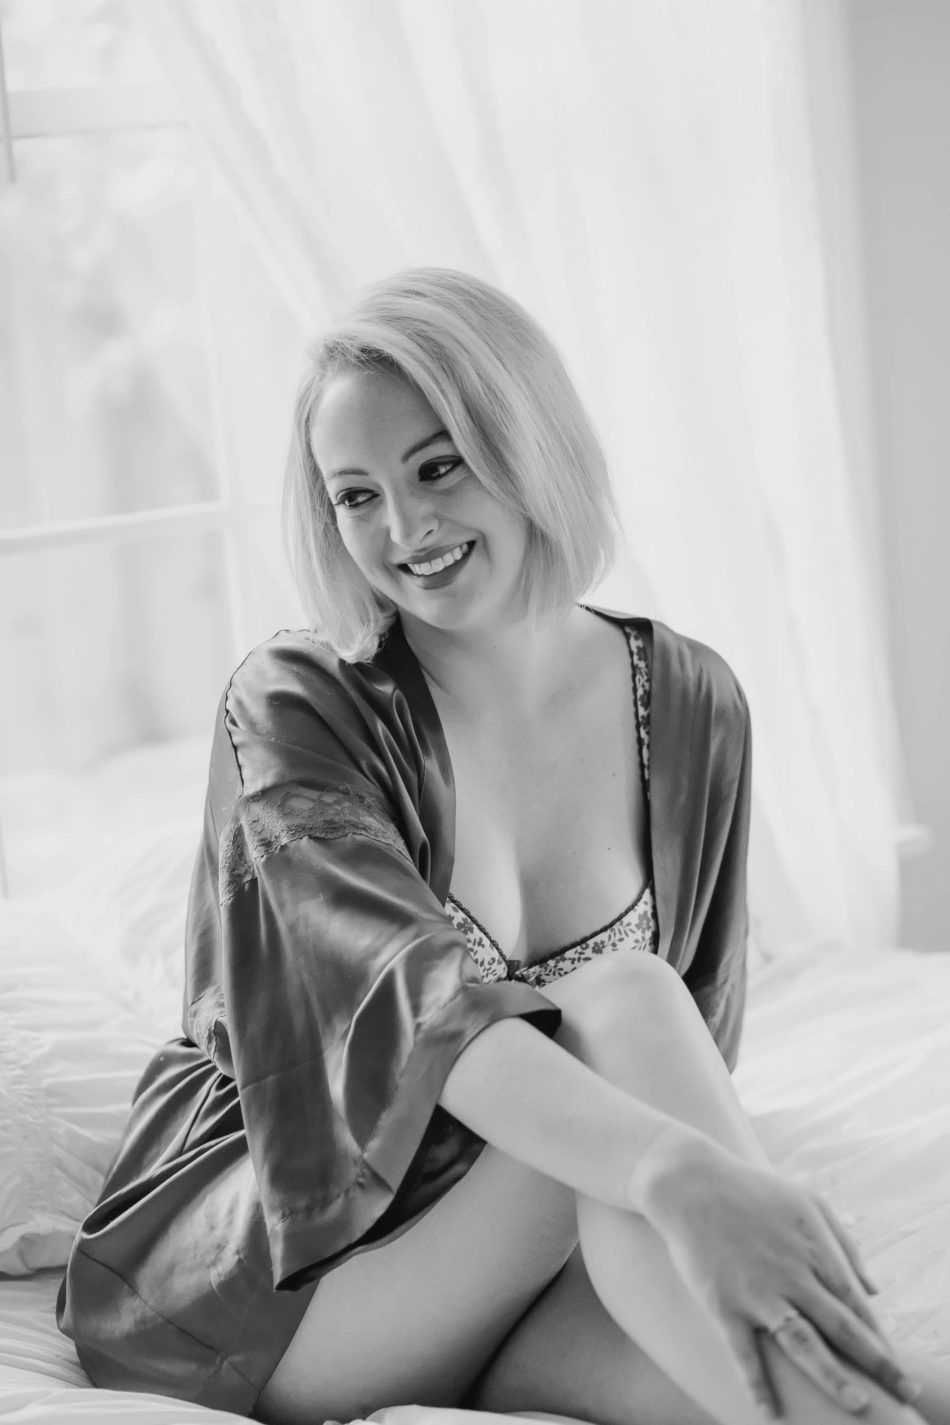 Ms M wears a silky navy blue robe in bed, Boudoir Photography, Charleston, SC Kate Timbers Photography. http://katetimbers.com #katetimbersphotography // Charleston Photography // Inspiration